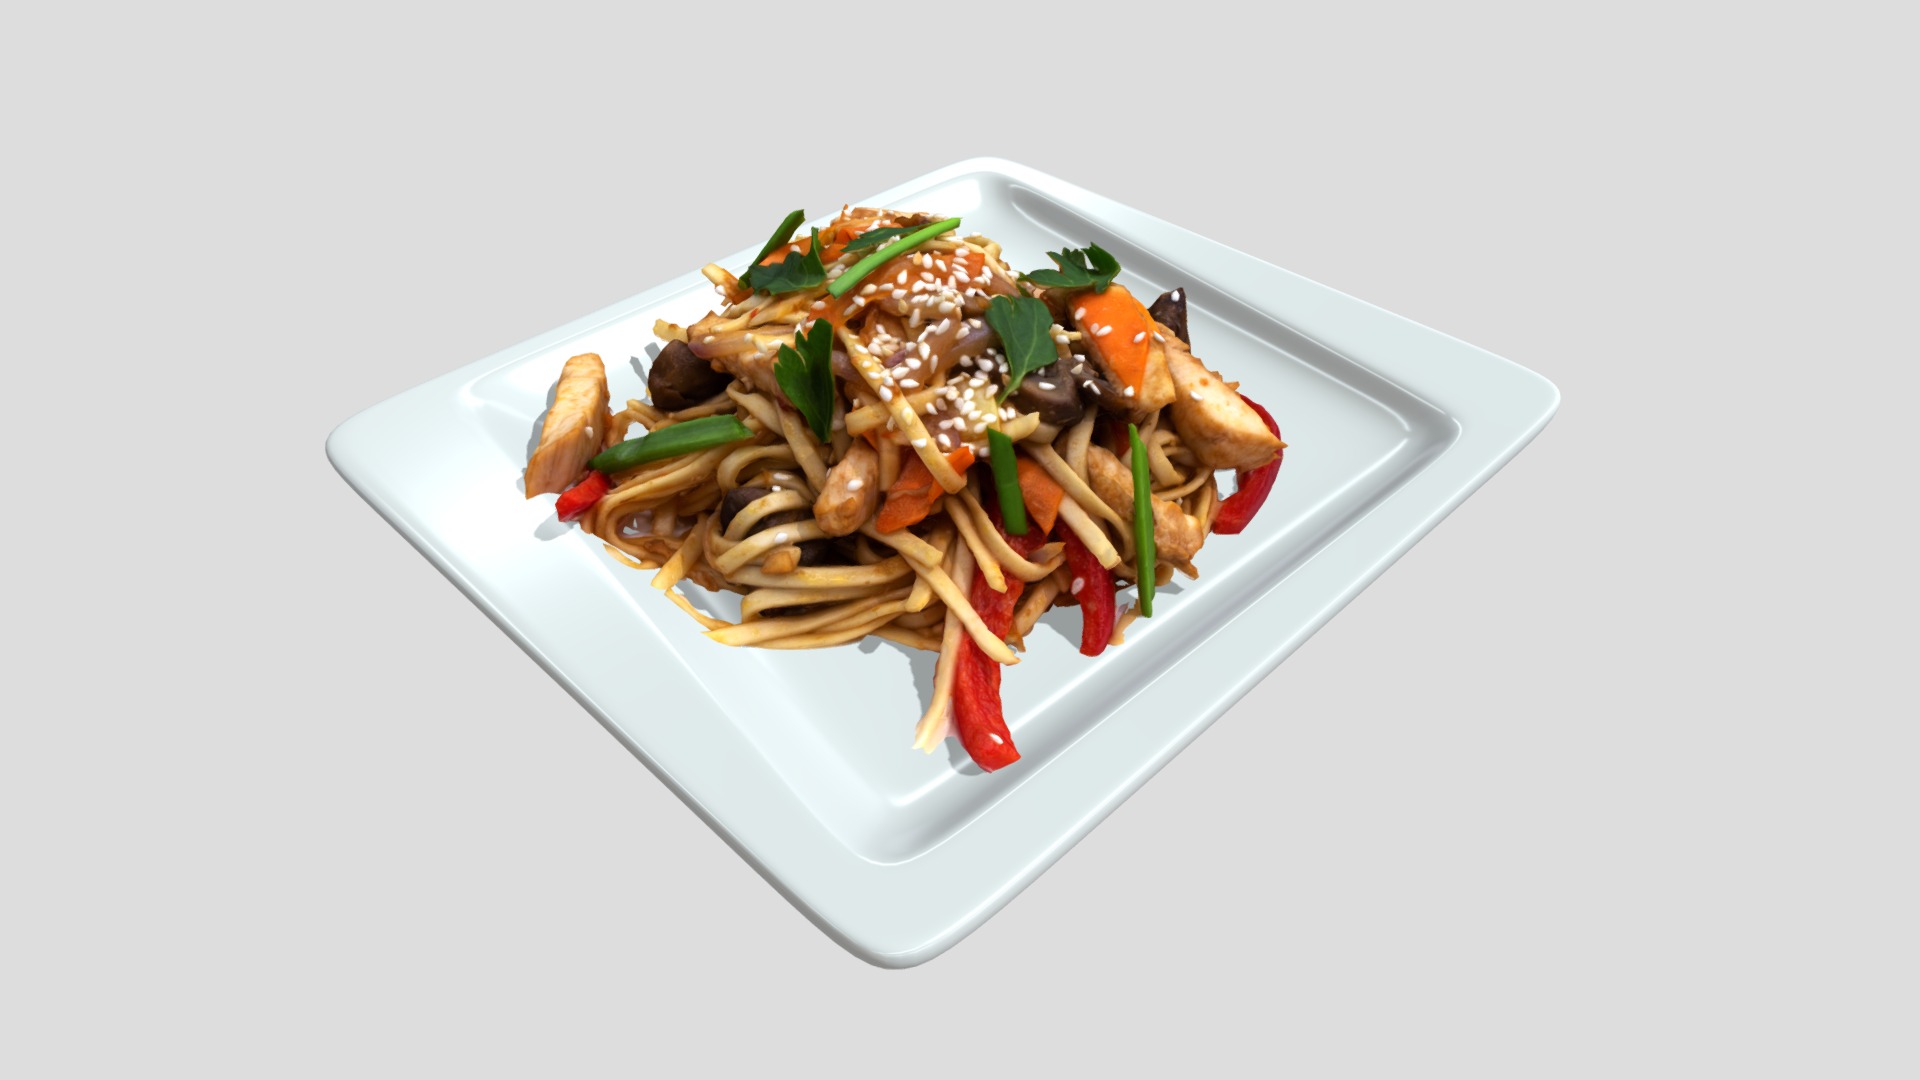 3D model 02 V1 - This is a 3D model of the 02 V1. The 3D model is about a plate of food.